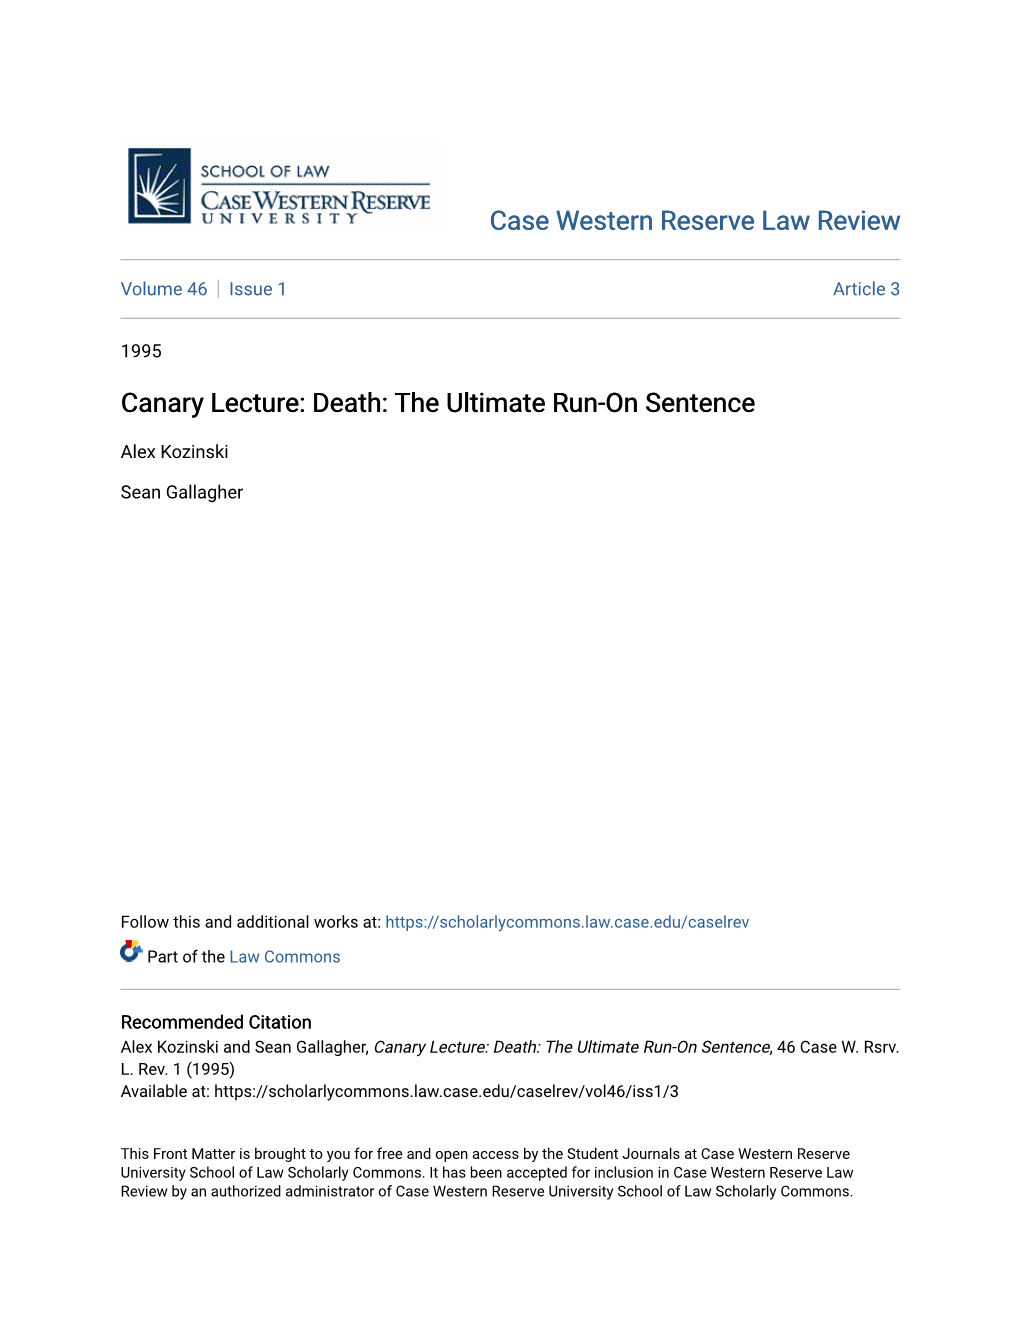 Canary Lecture: Death: the Ultimate Run-On Sentence